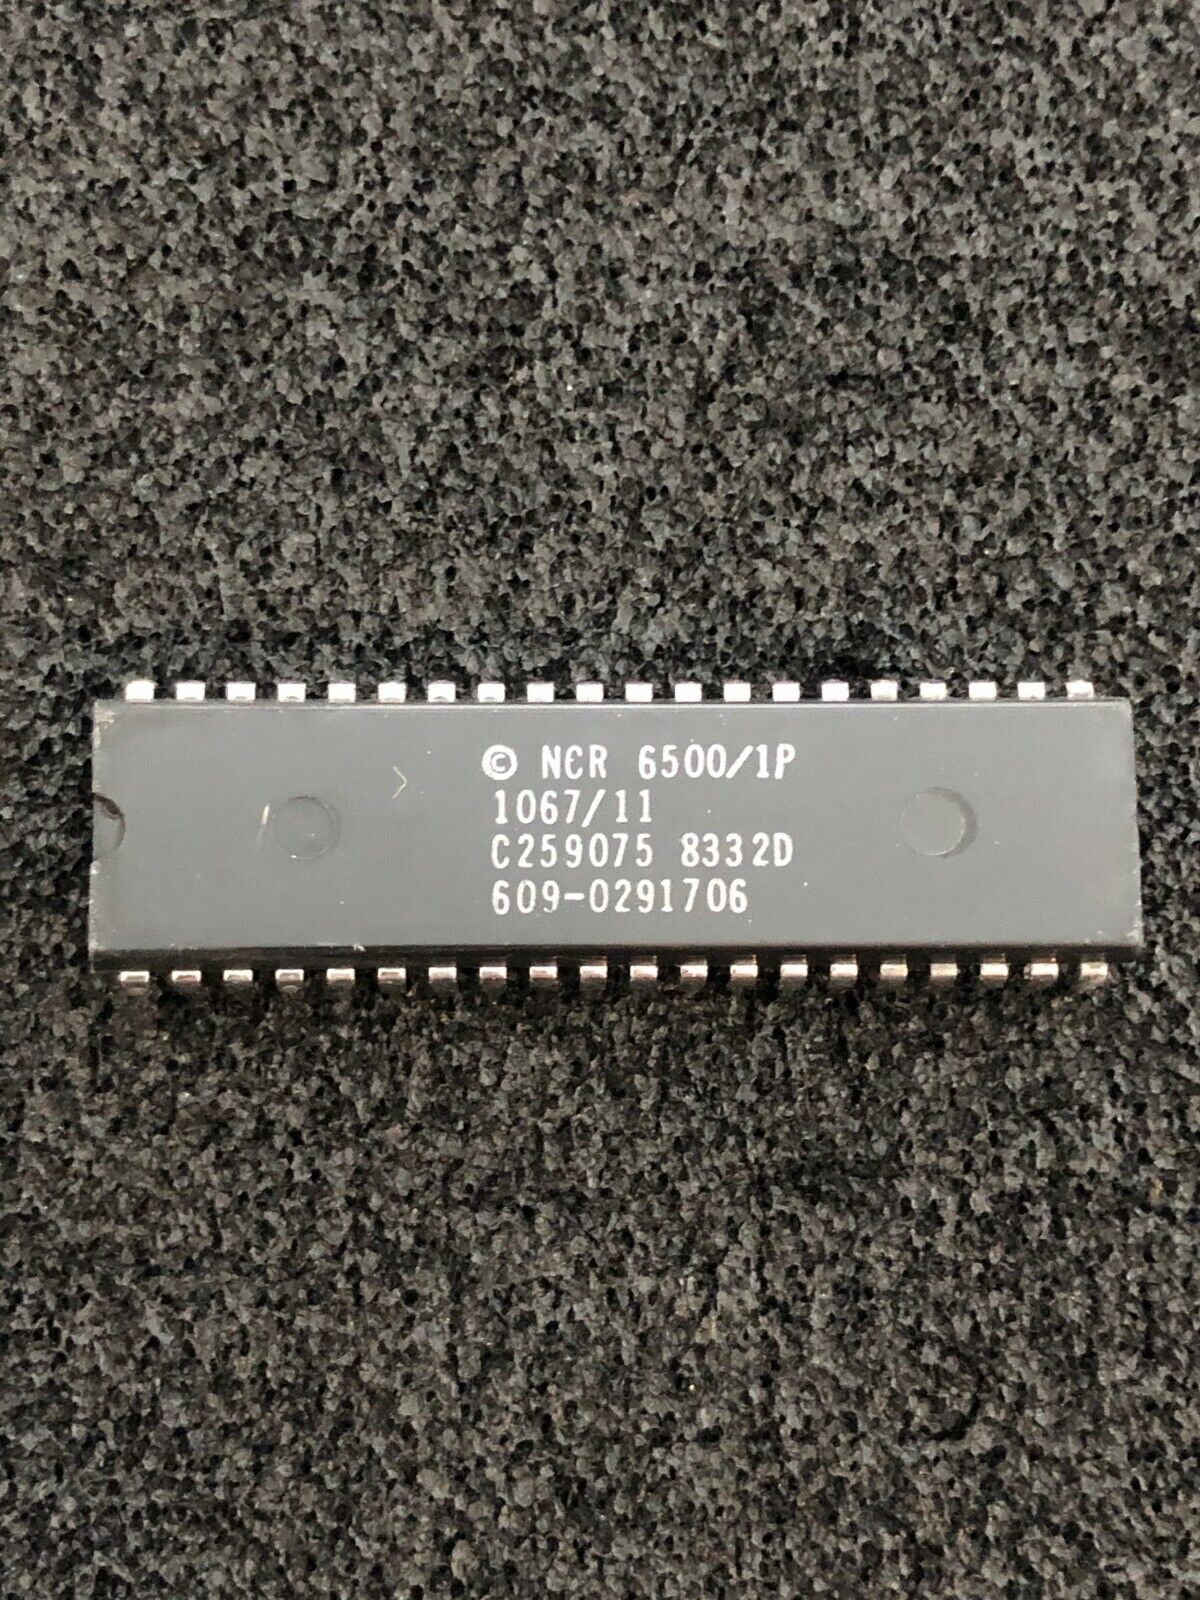 6500/1 CPU COMMODORE USED IT IN AMIGA KB & 1520 PLOTTER NMOS NCR NOS 6502 like*